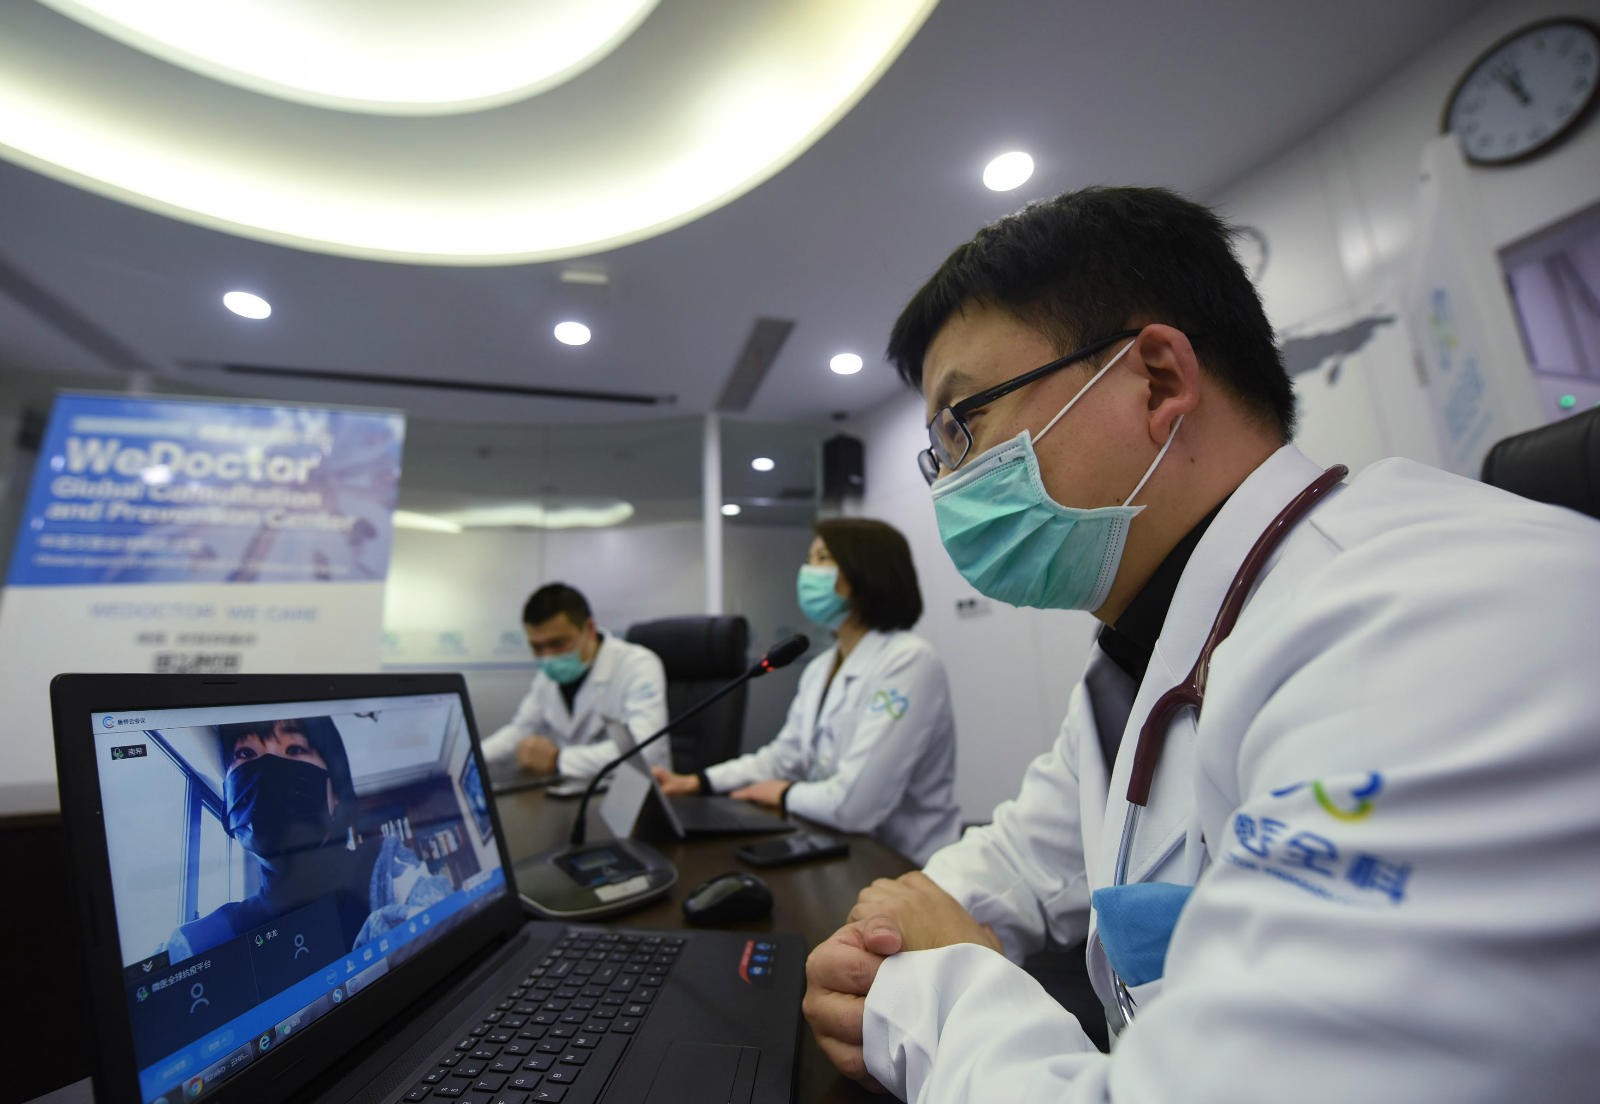 Chinese, Irish medical experts exchange experience on COVID-19 via video conference, build synergy in pandemic response